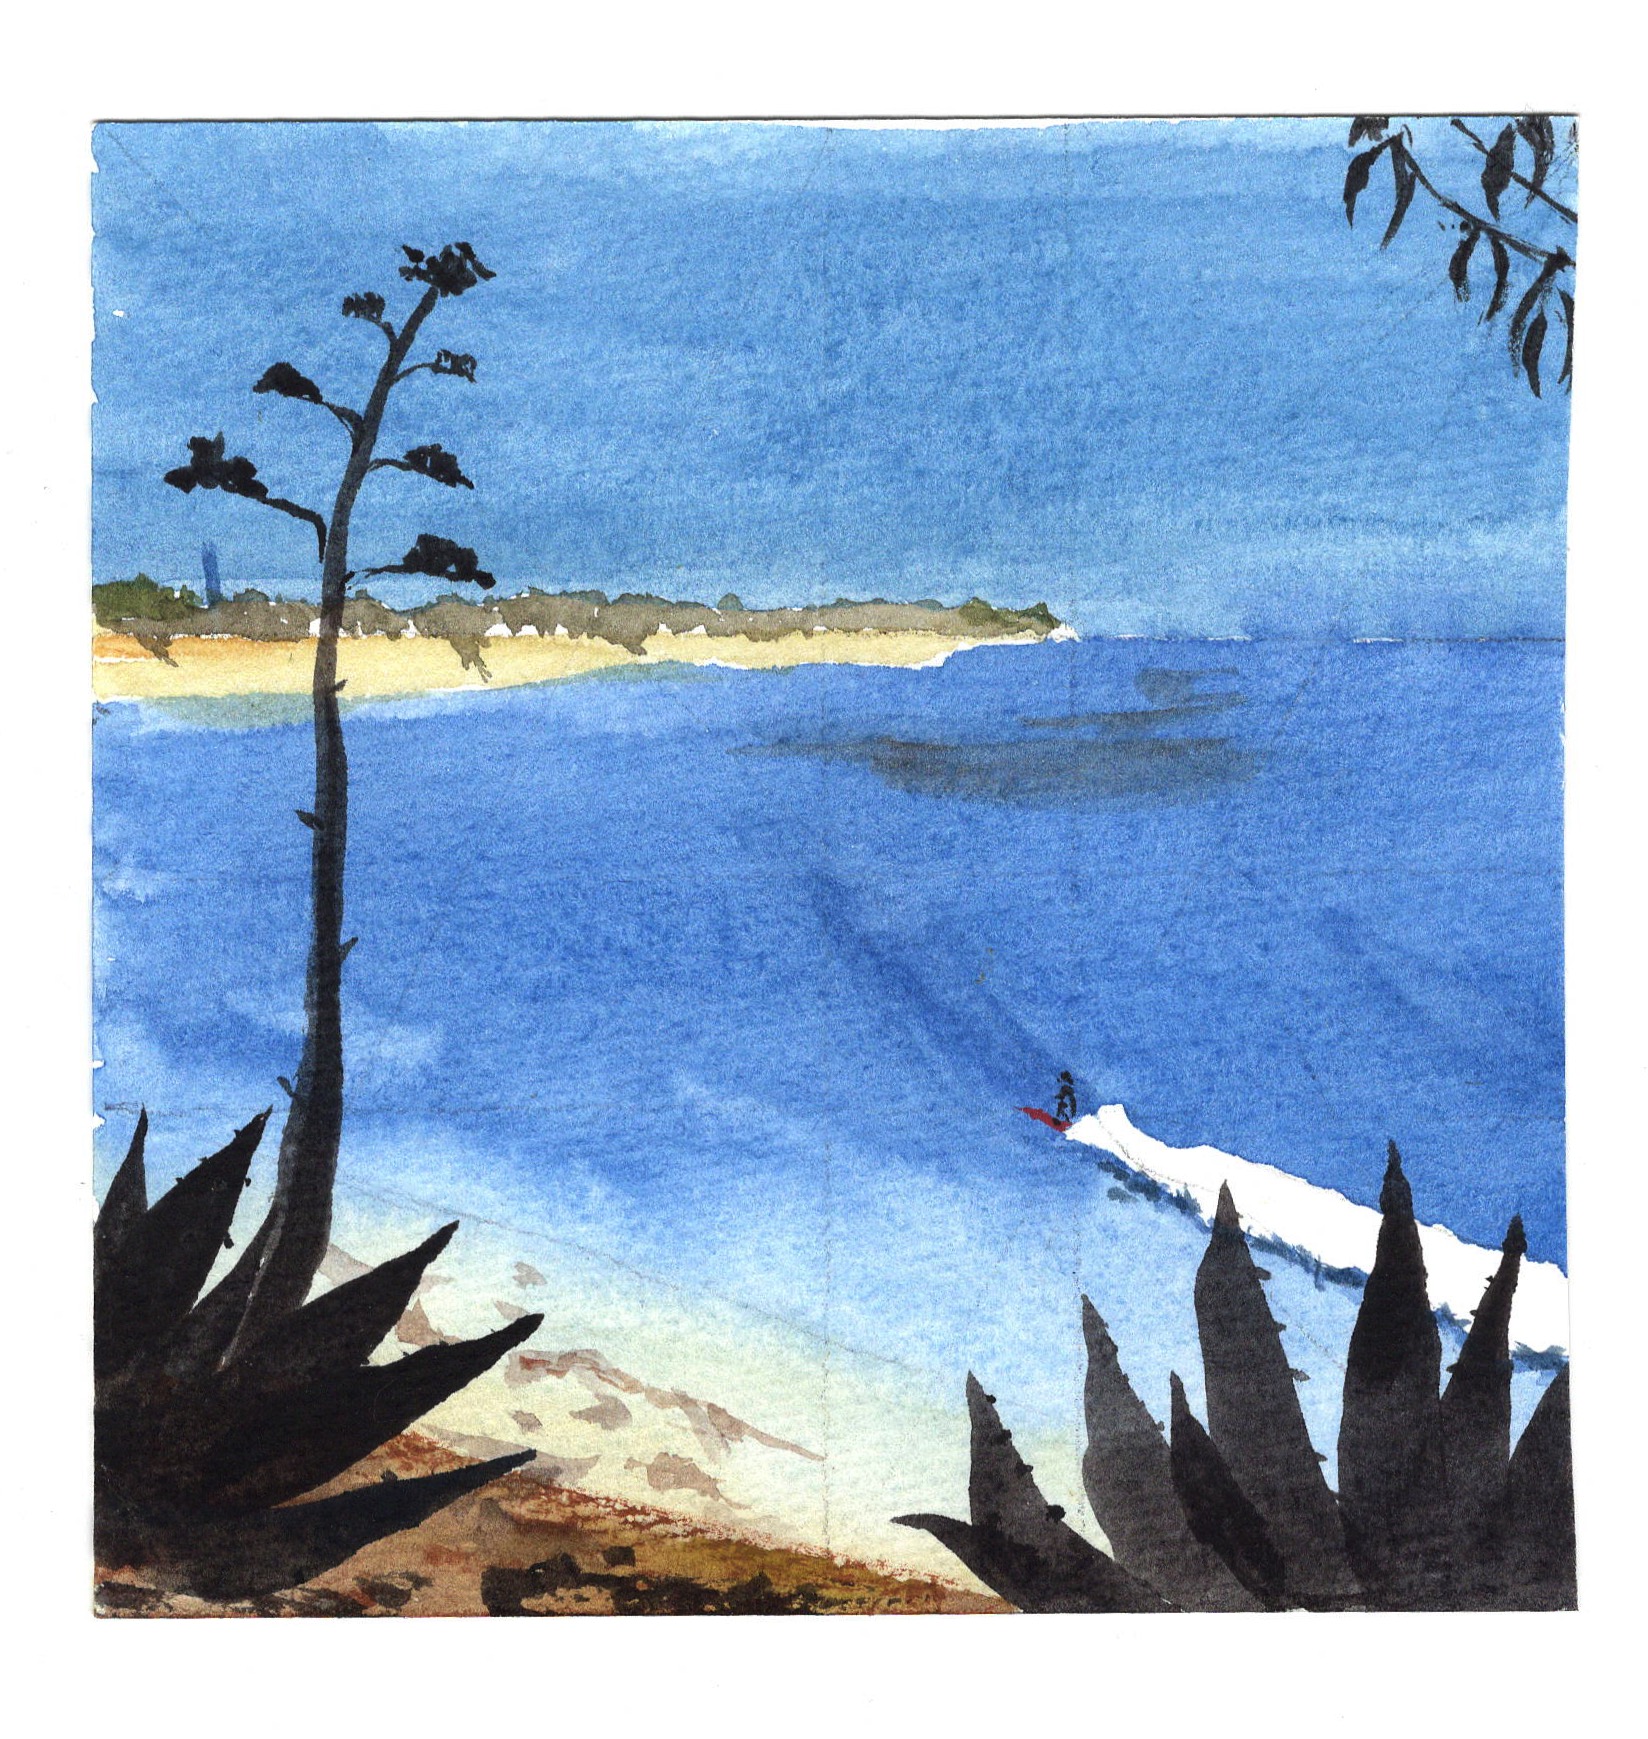 watercolor painting of surfer on a wave at Coal Oil Point in Santa Barbara California by Mark Mclychok